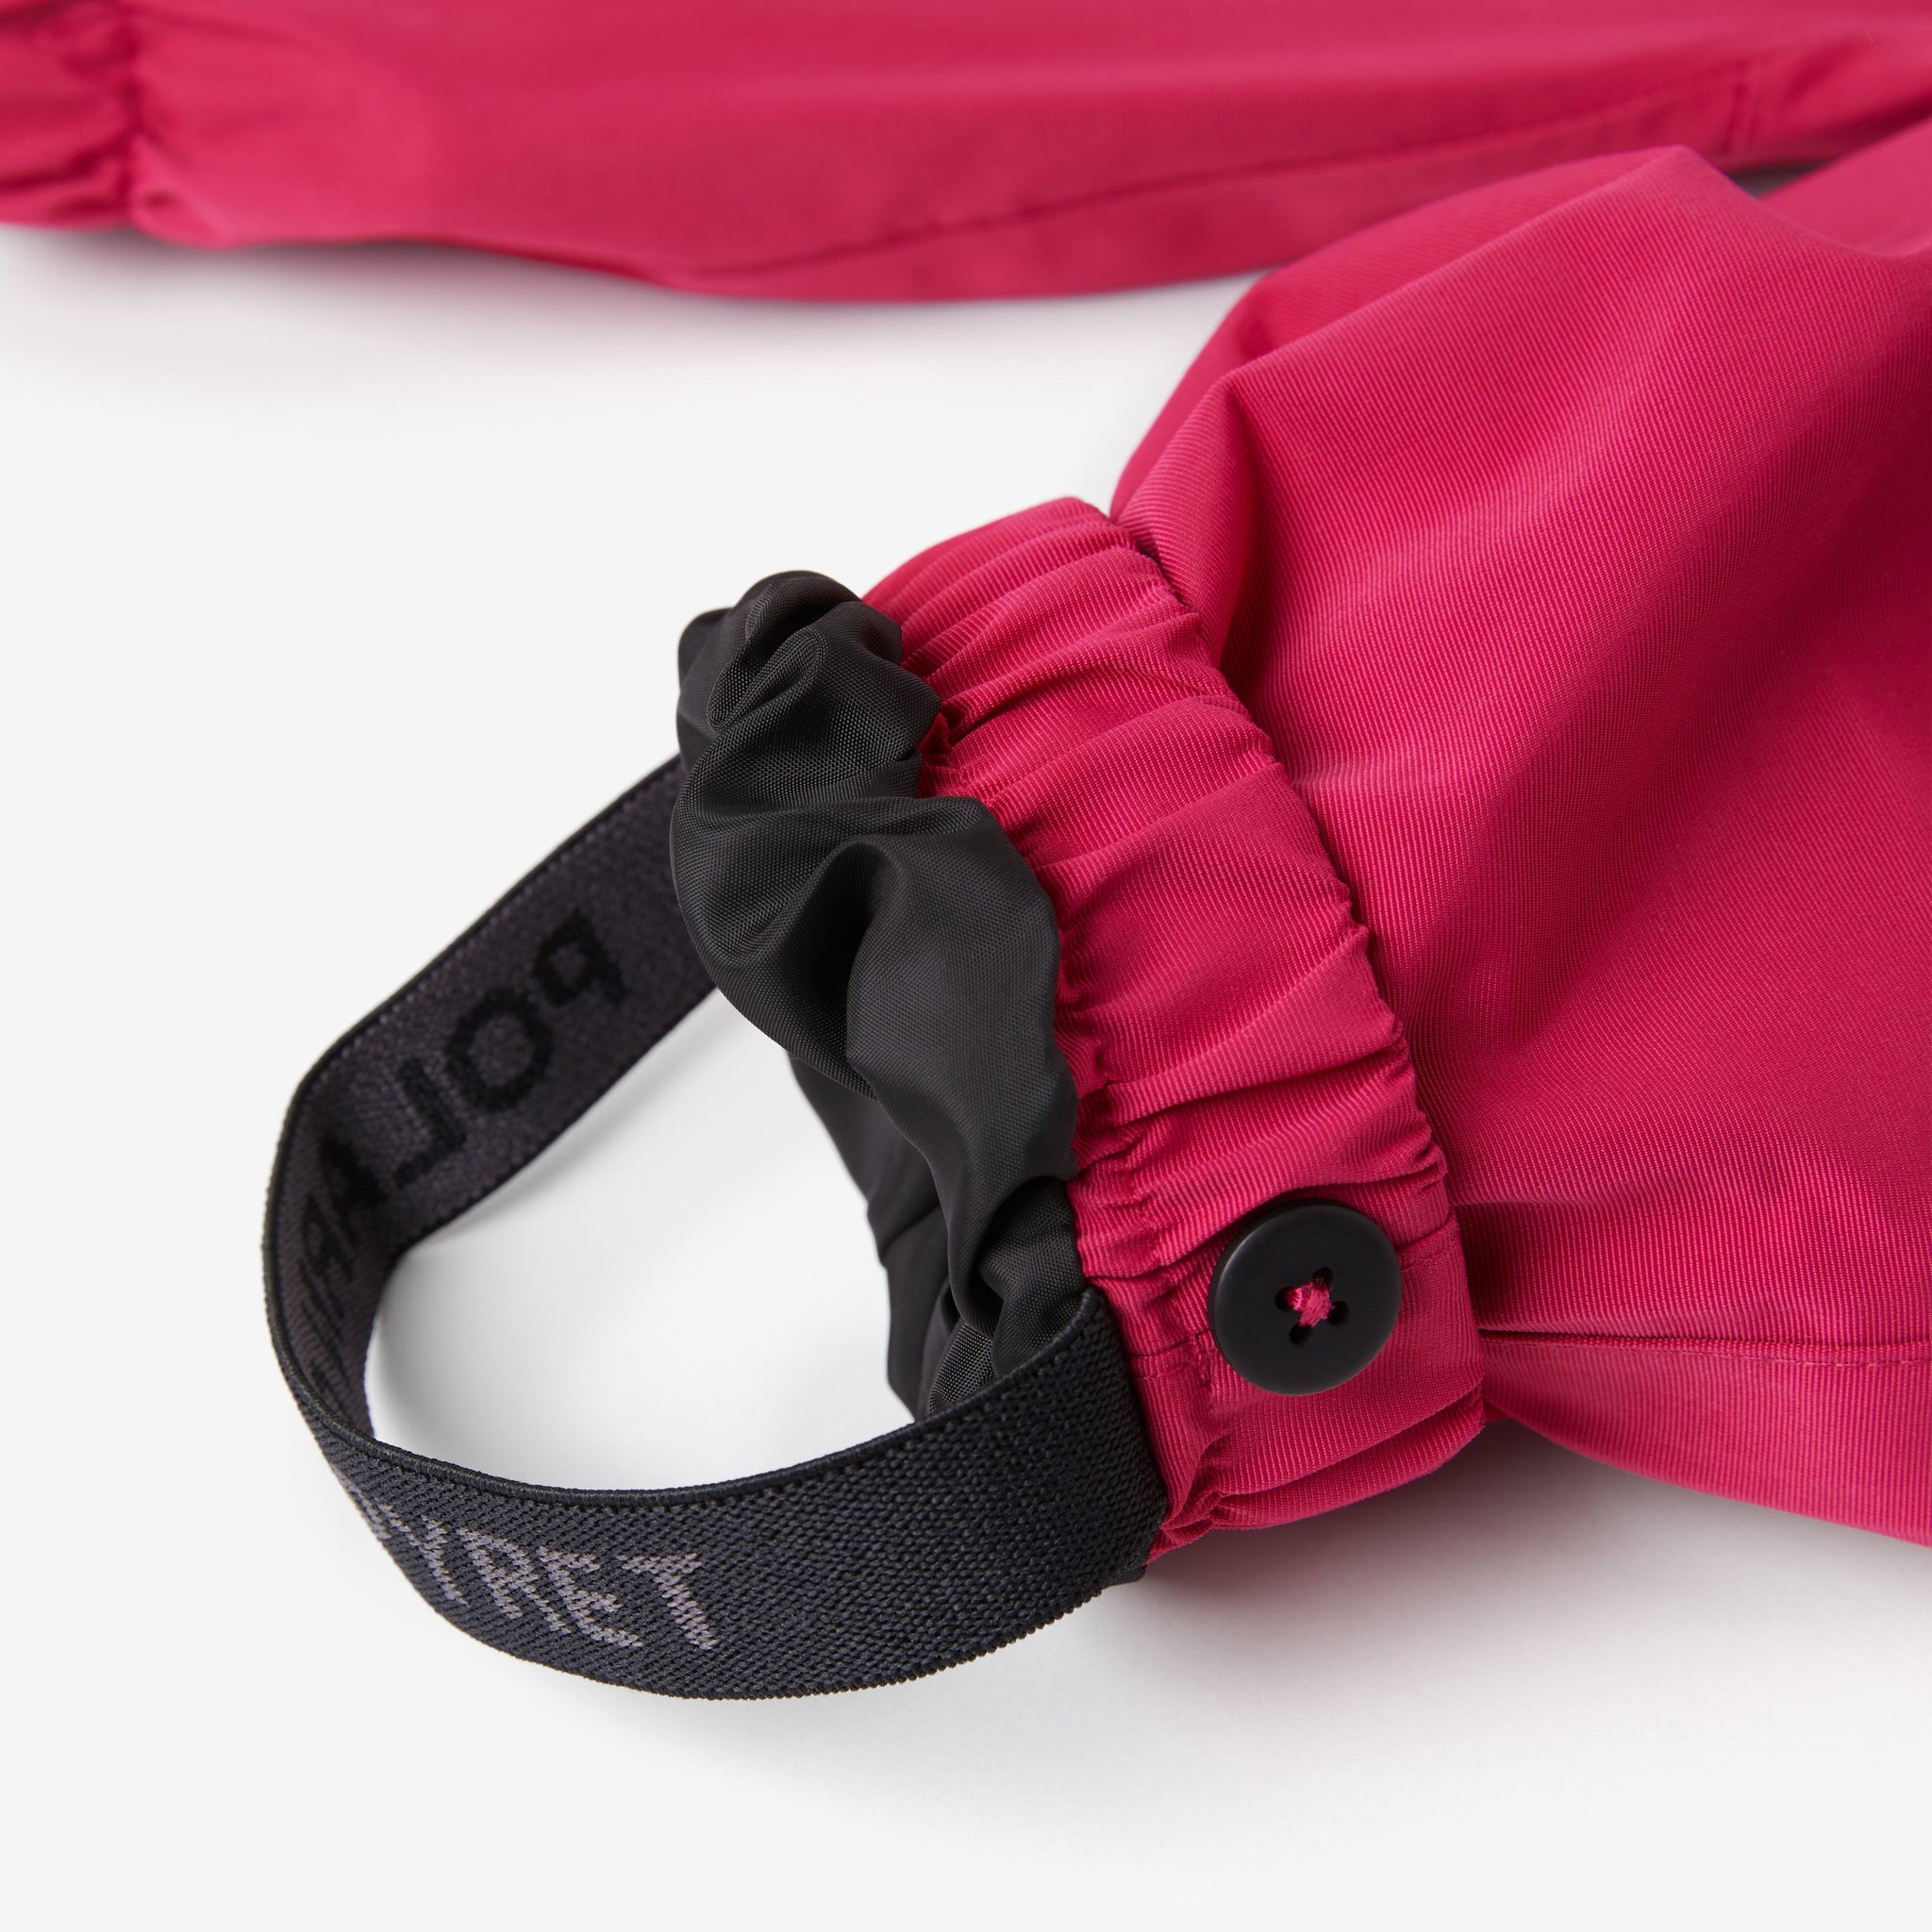 Red Kids Waterproof Trousers from the Polarn O. Pyret kidswear collection. Quality kids clothing made to last.